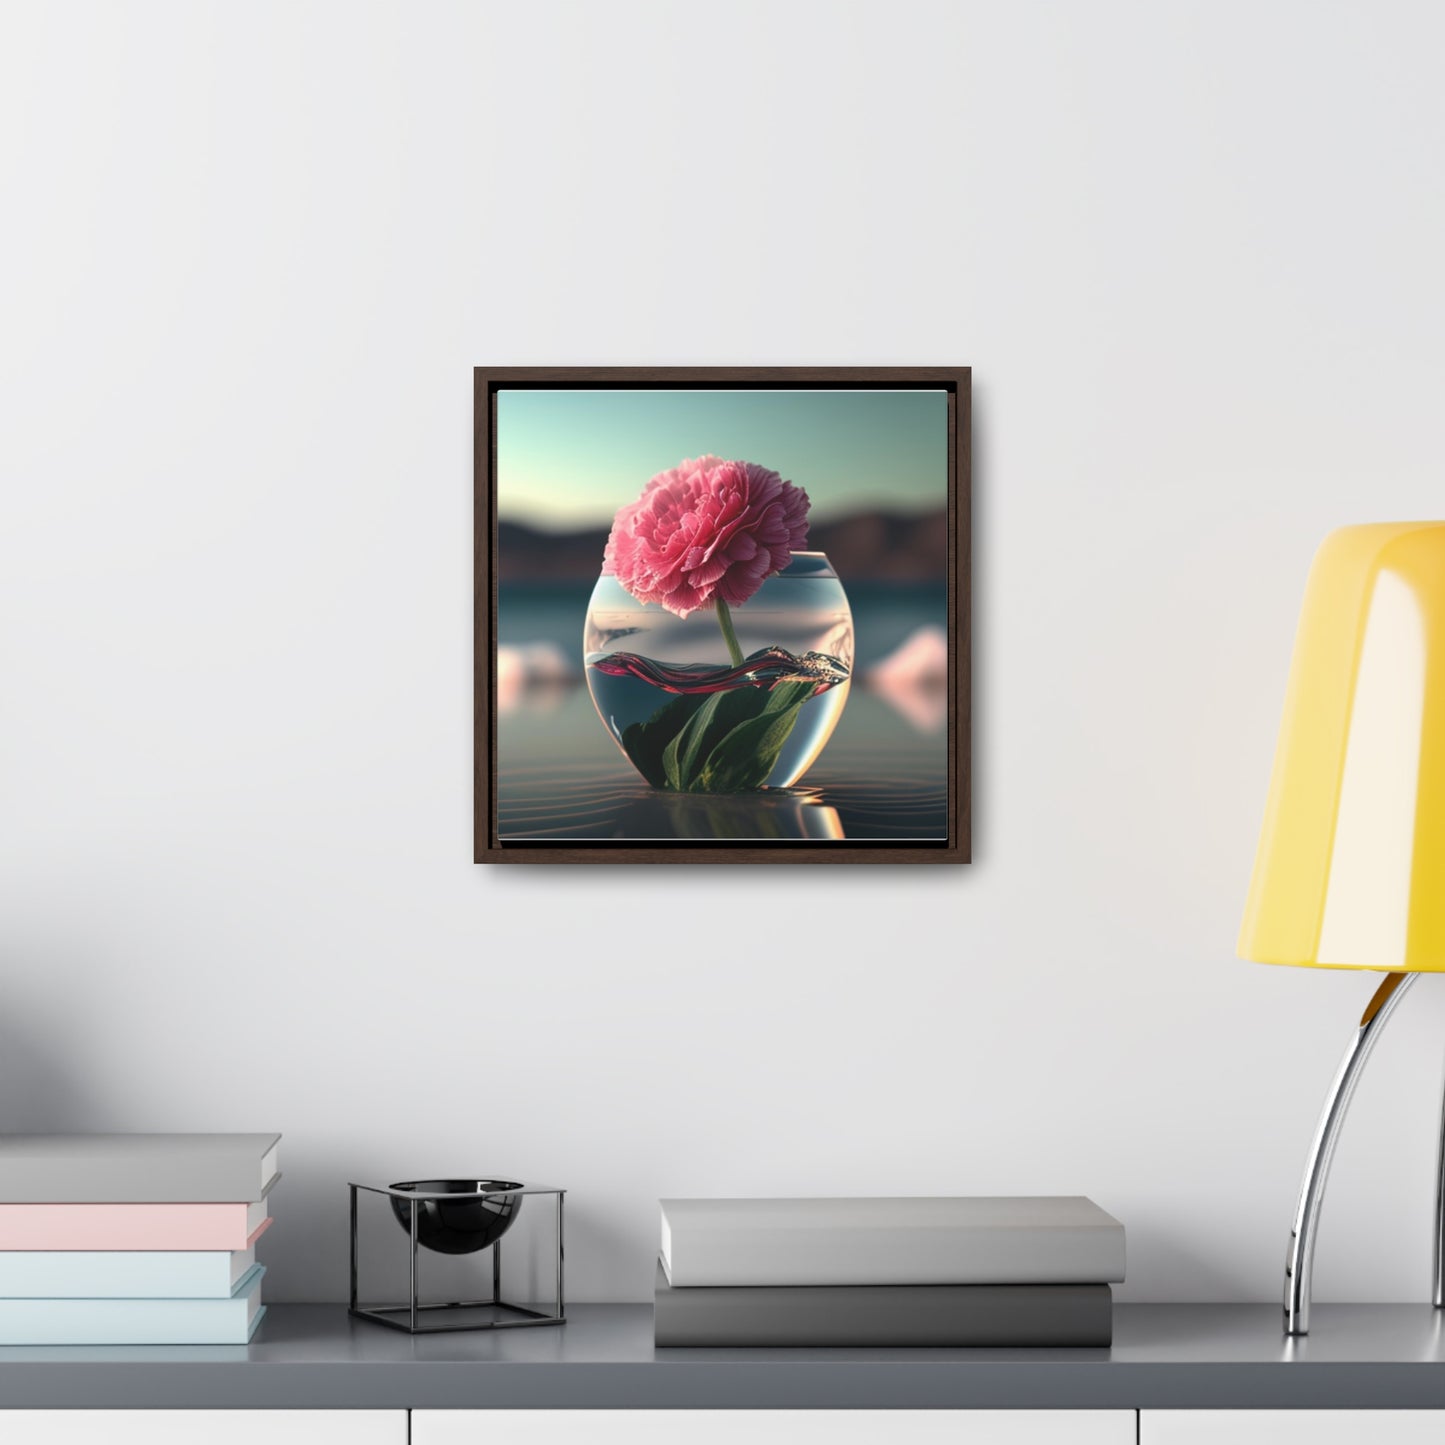 Gallery Canvas Wraps, Square Frame Carnation 2